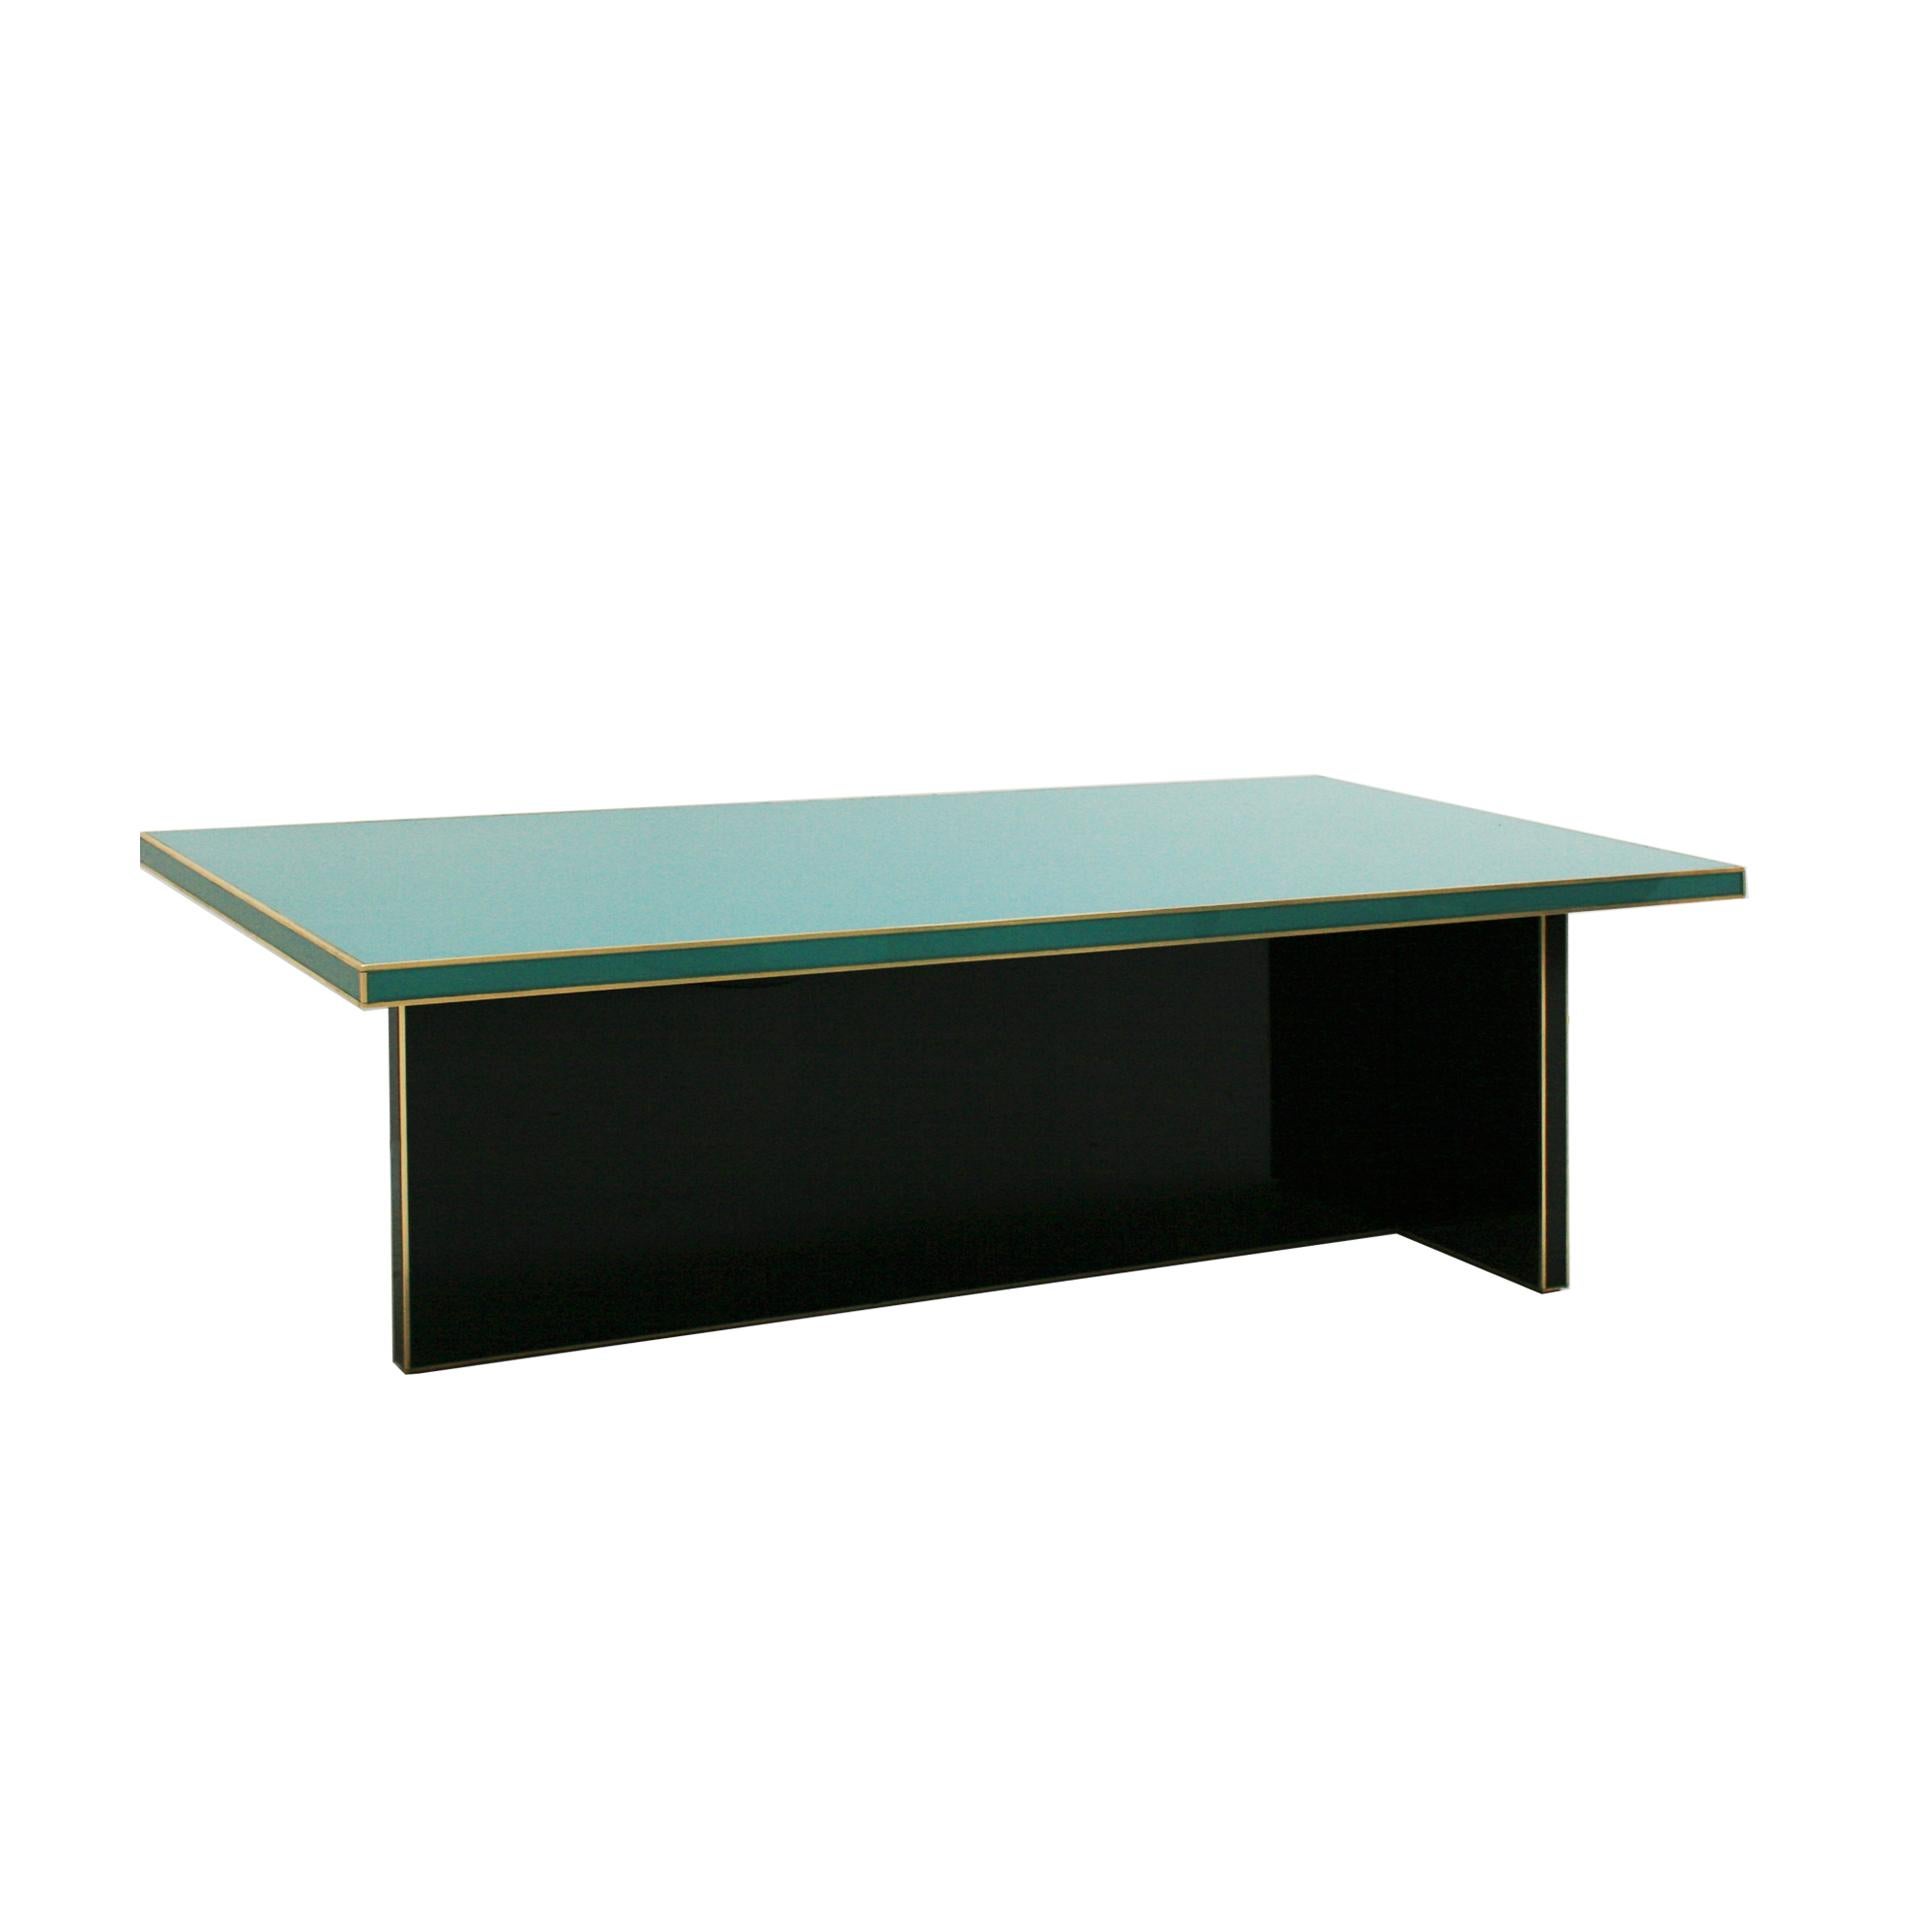 Rectangular coffee table designed and produced by L.A. Studio made of solid wood structure coated with black and blue Murano glass. Dimensions can be modified.